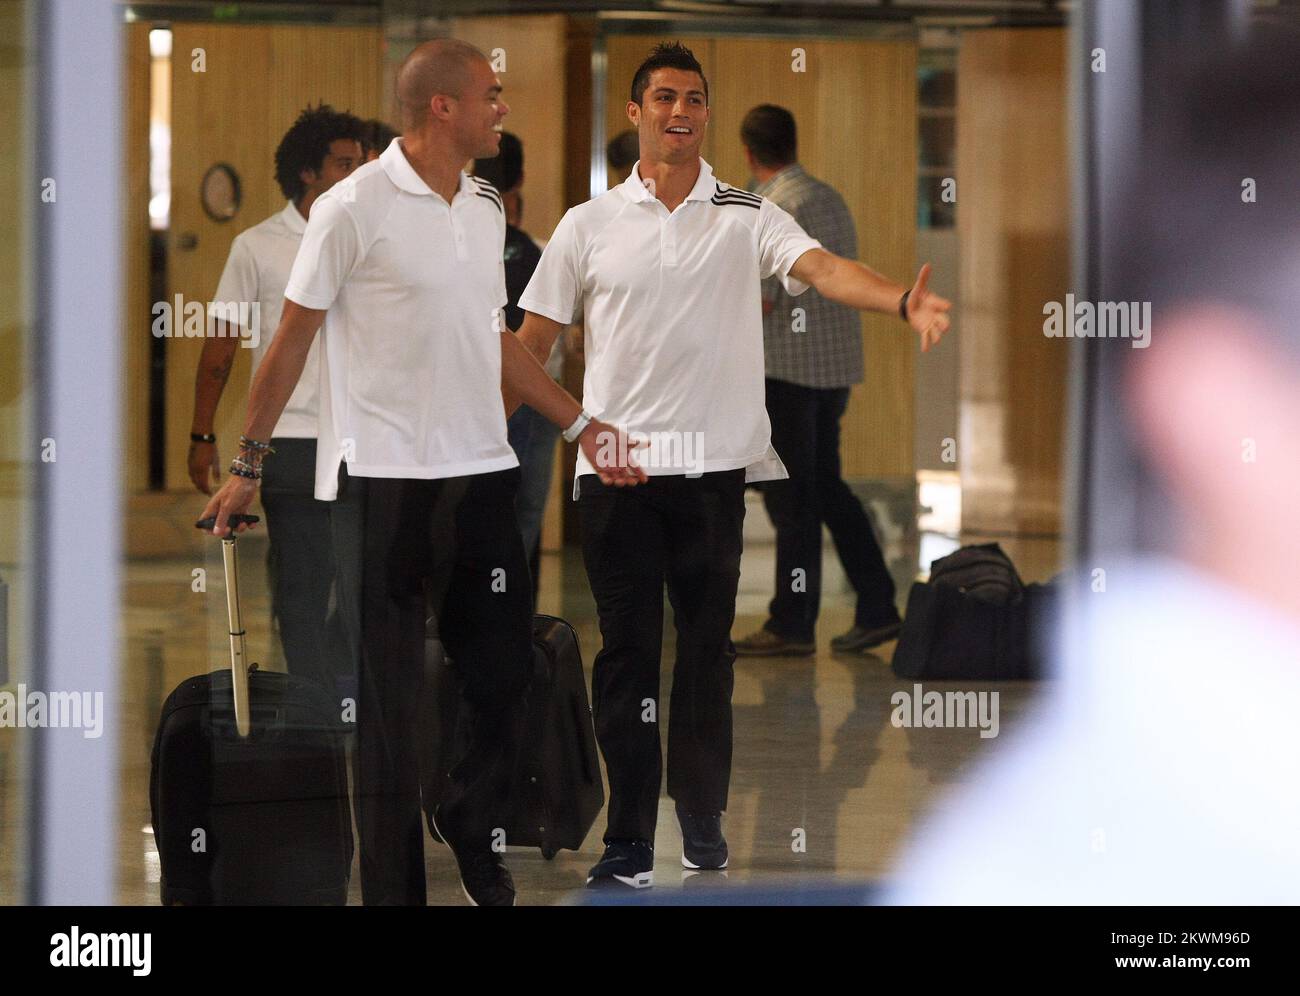 Real Madrid's Cristiano Ronaldo (right) and team-mate Pepe arrive at the hotel Esplanade,  the day before the Champions League match against Dinamo Zagreb. Photo: Marko Prpic/PIXSELL Stock Photo